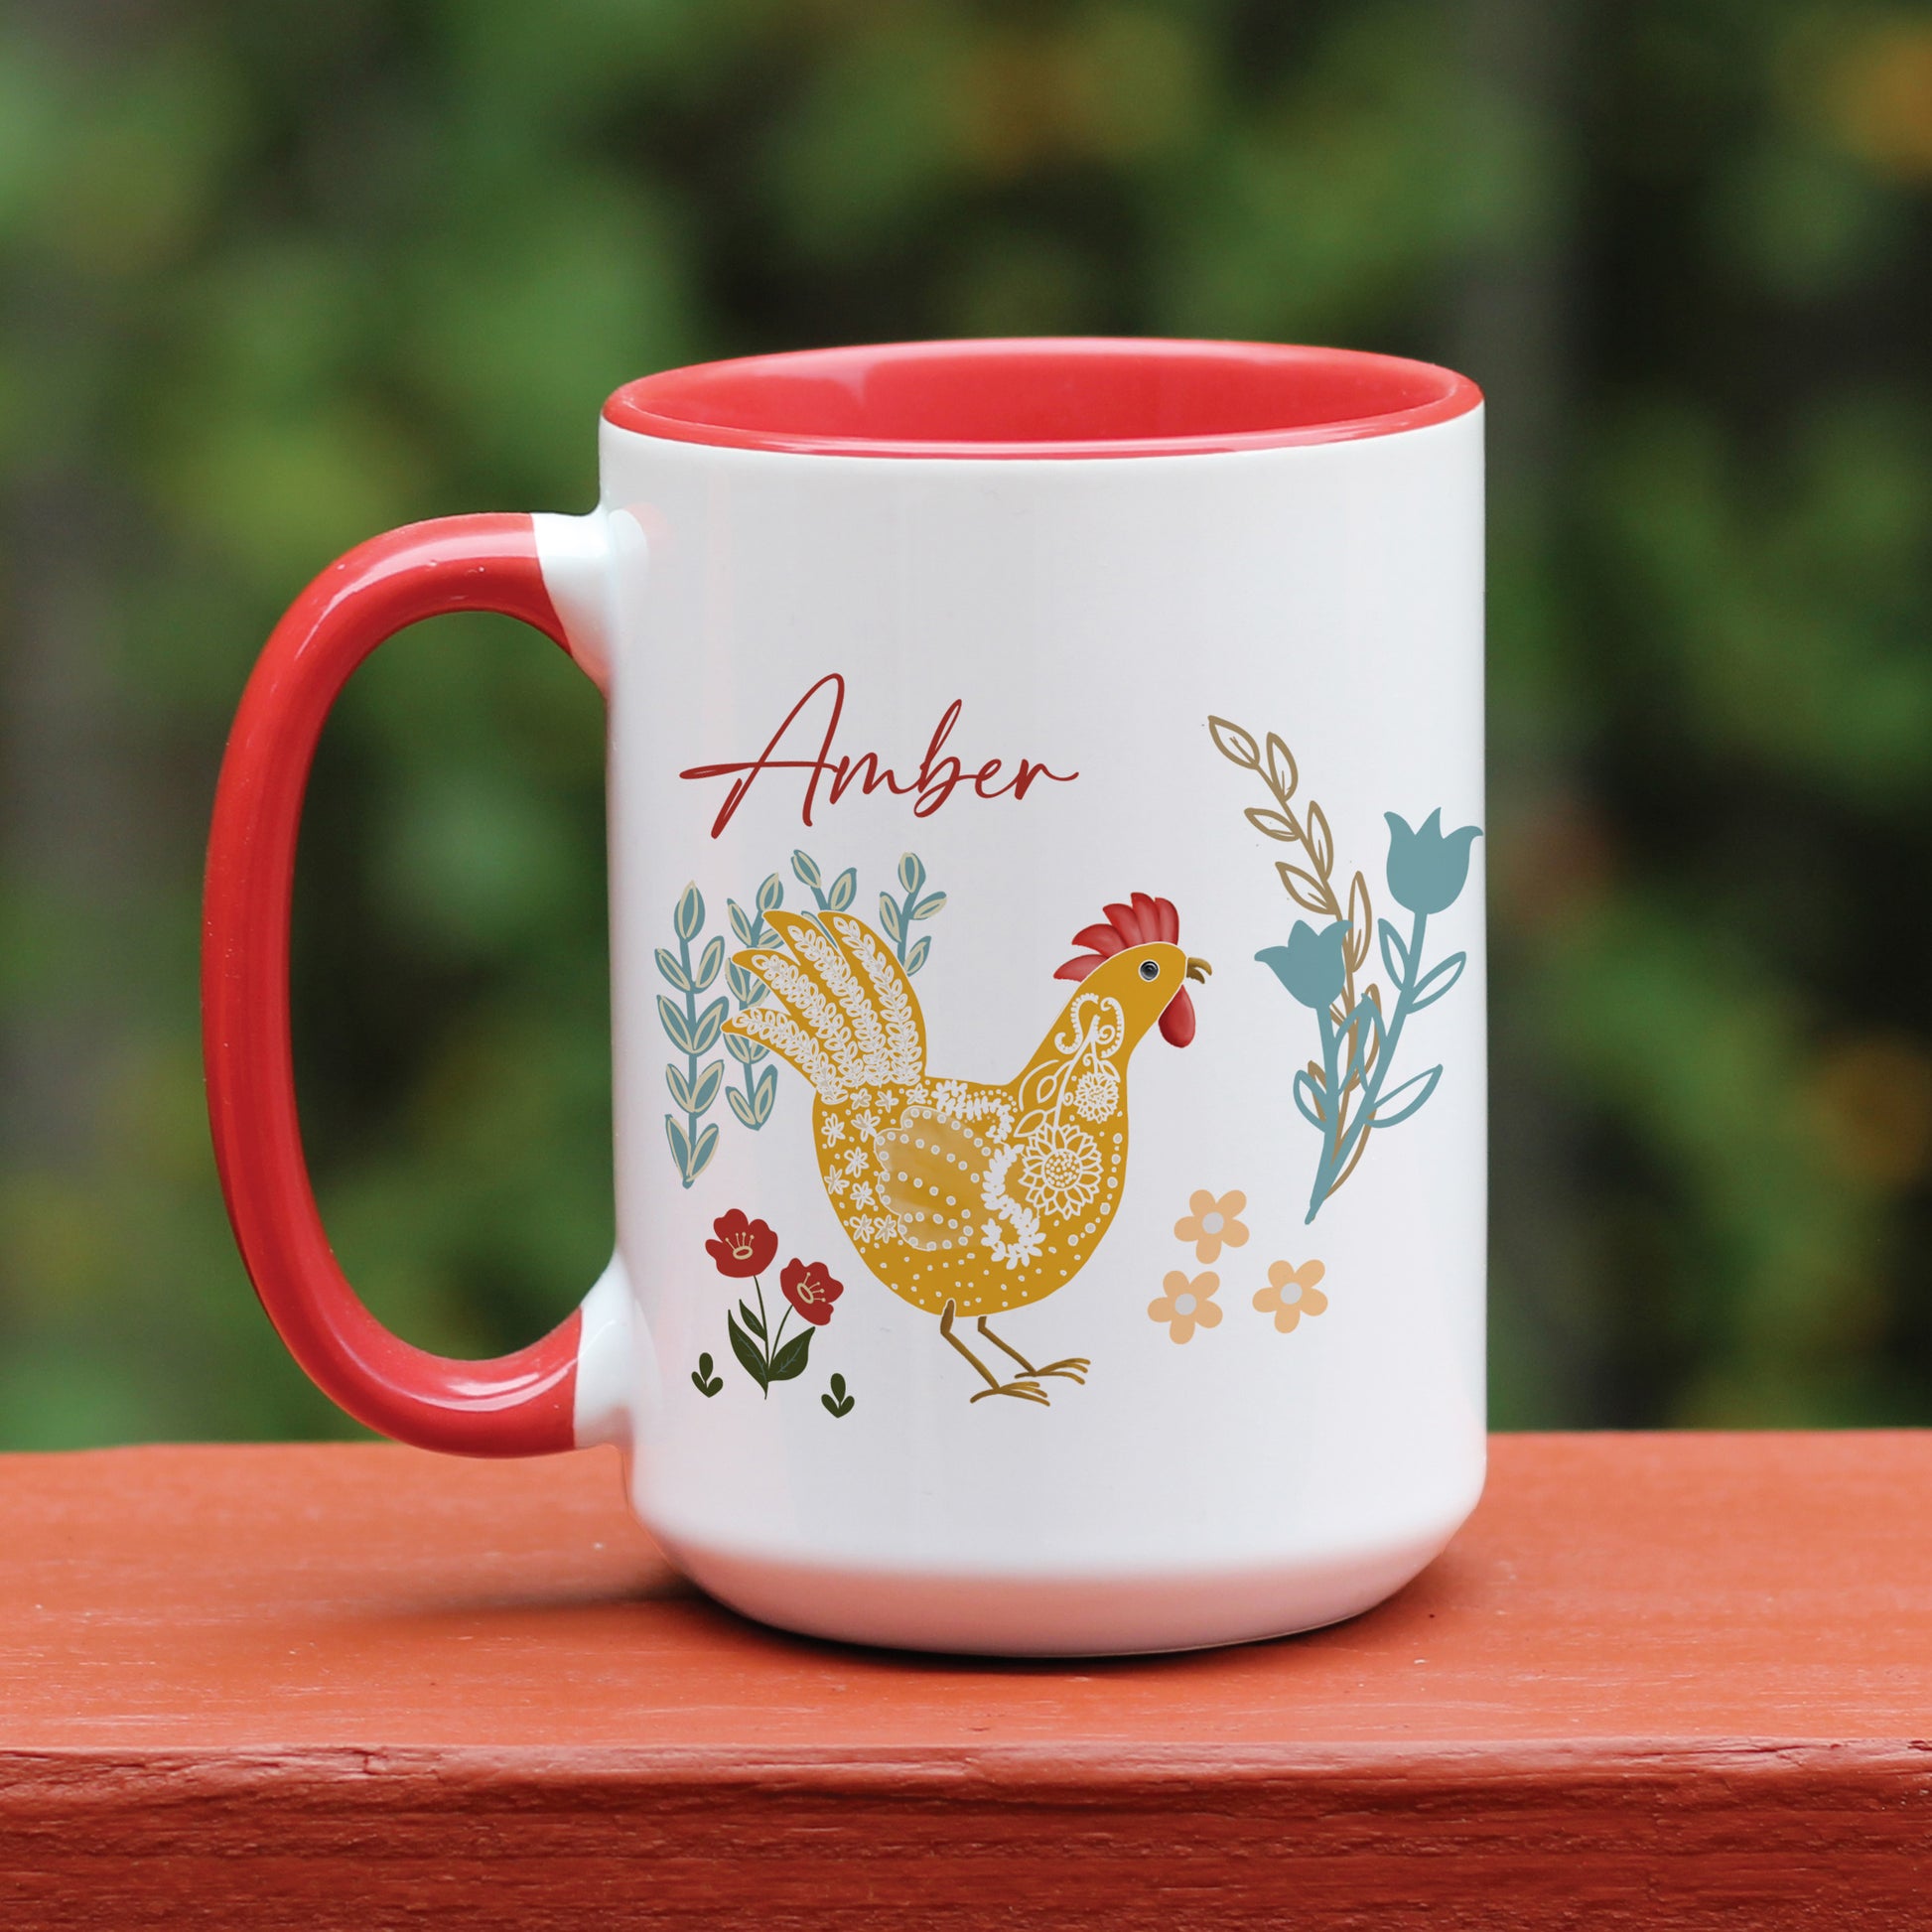 Chicken and rooster themed red handle ceramic mug with floral designs in blue, yellow, and red. Personalized with name Amber in script.